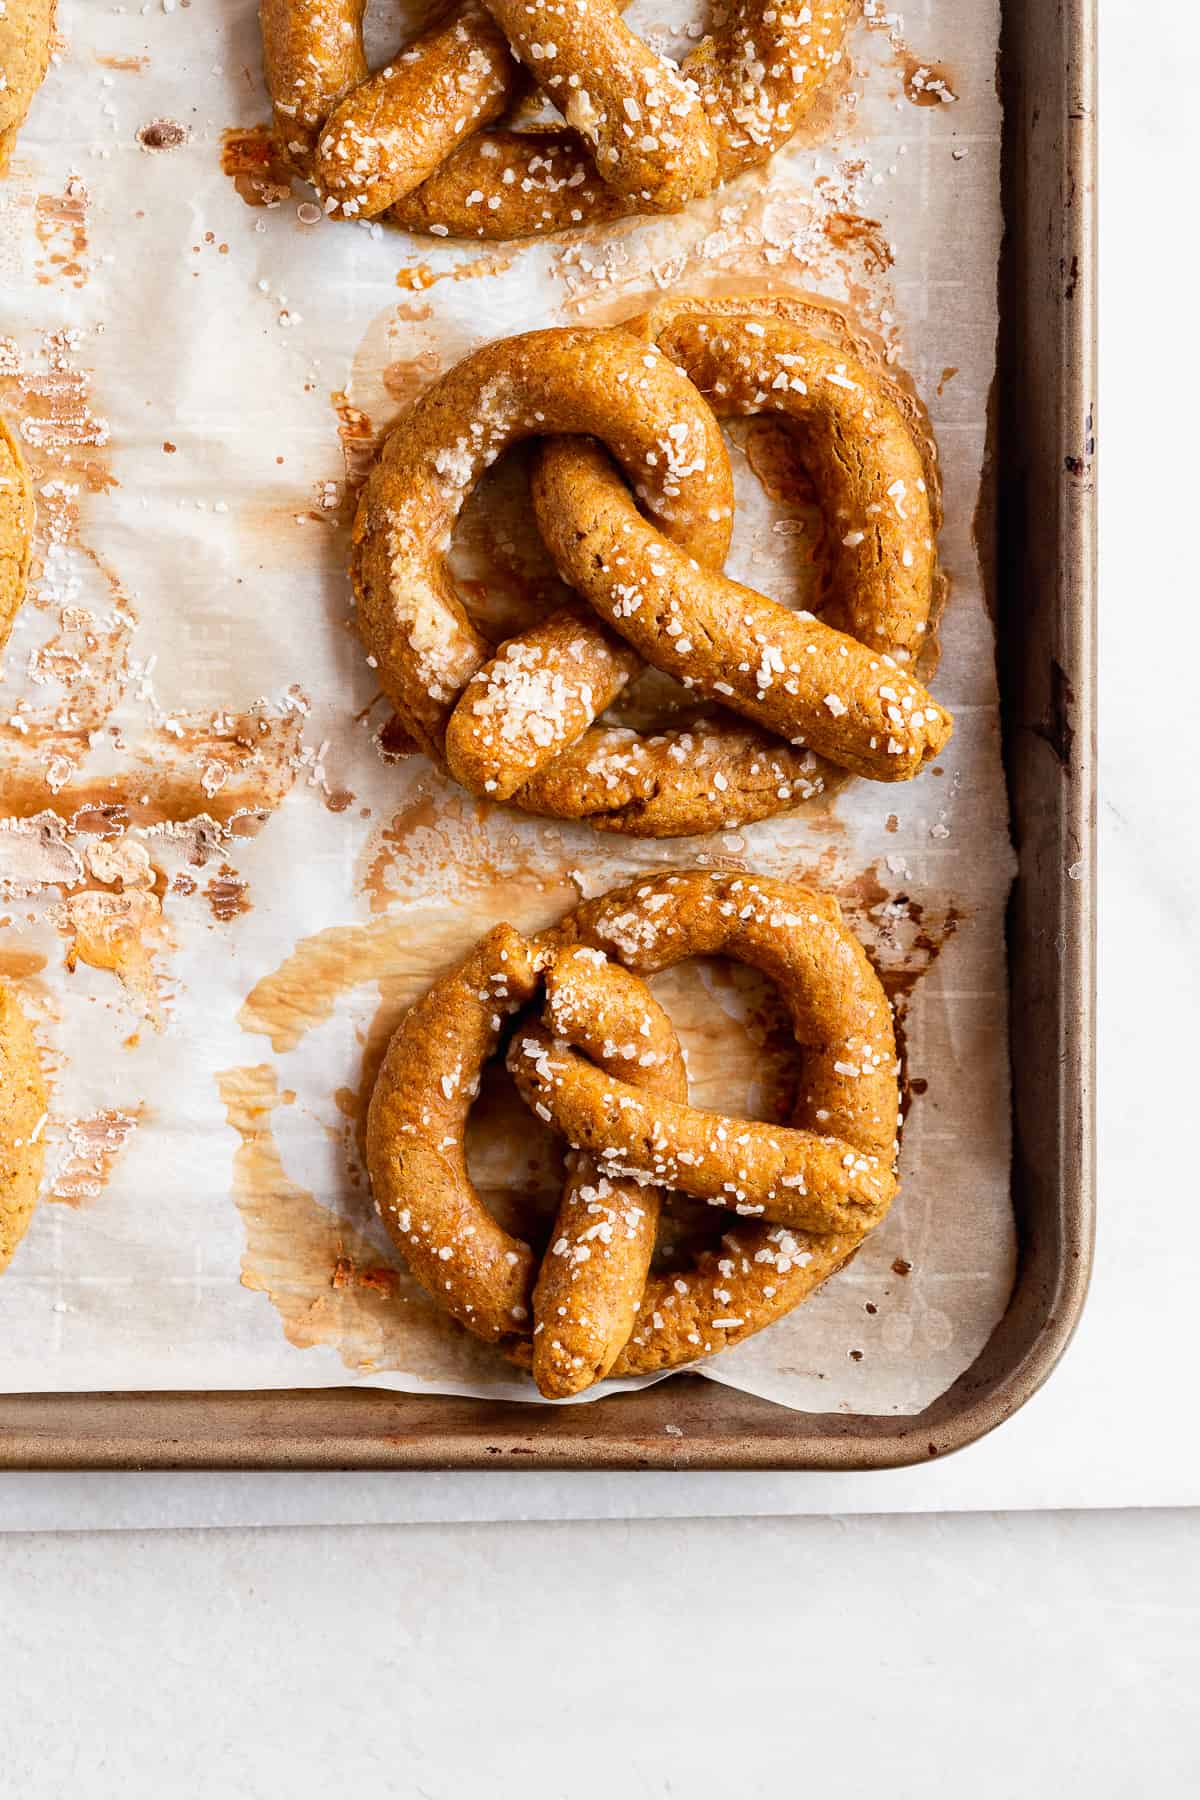 Overhead photo of a baking sheet with parchment paper and several Gluten-free Soft Pretzels hot out of the oven.  